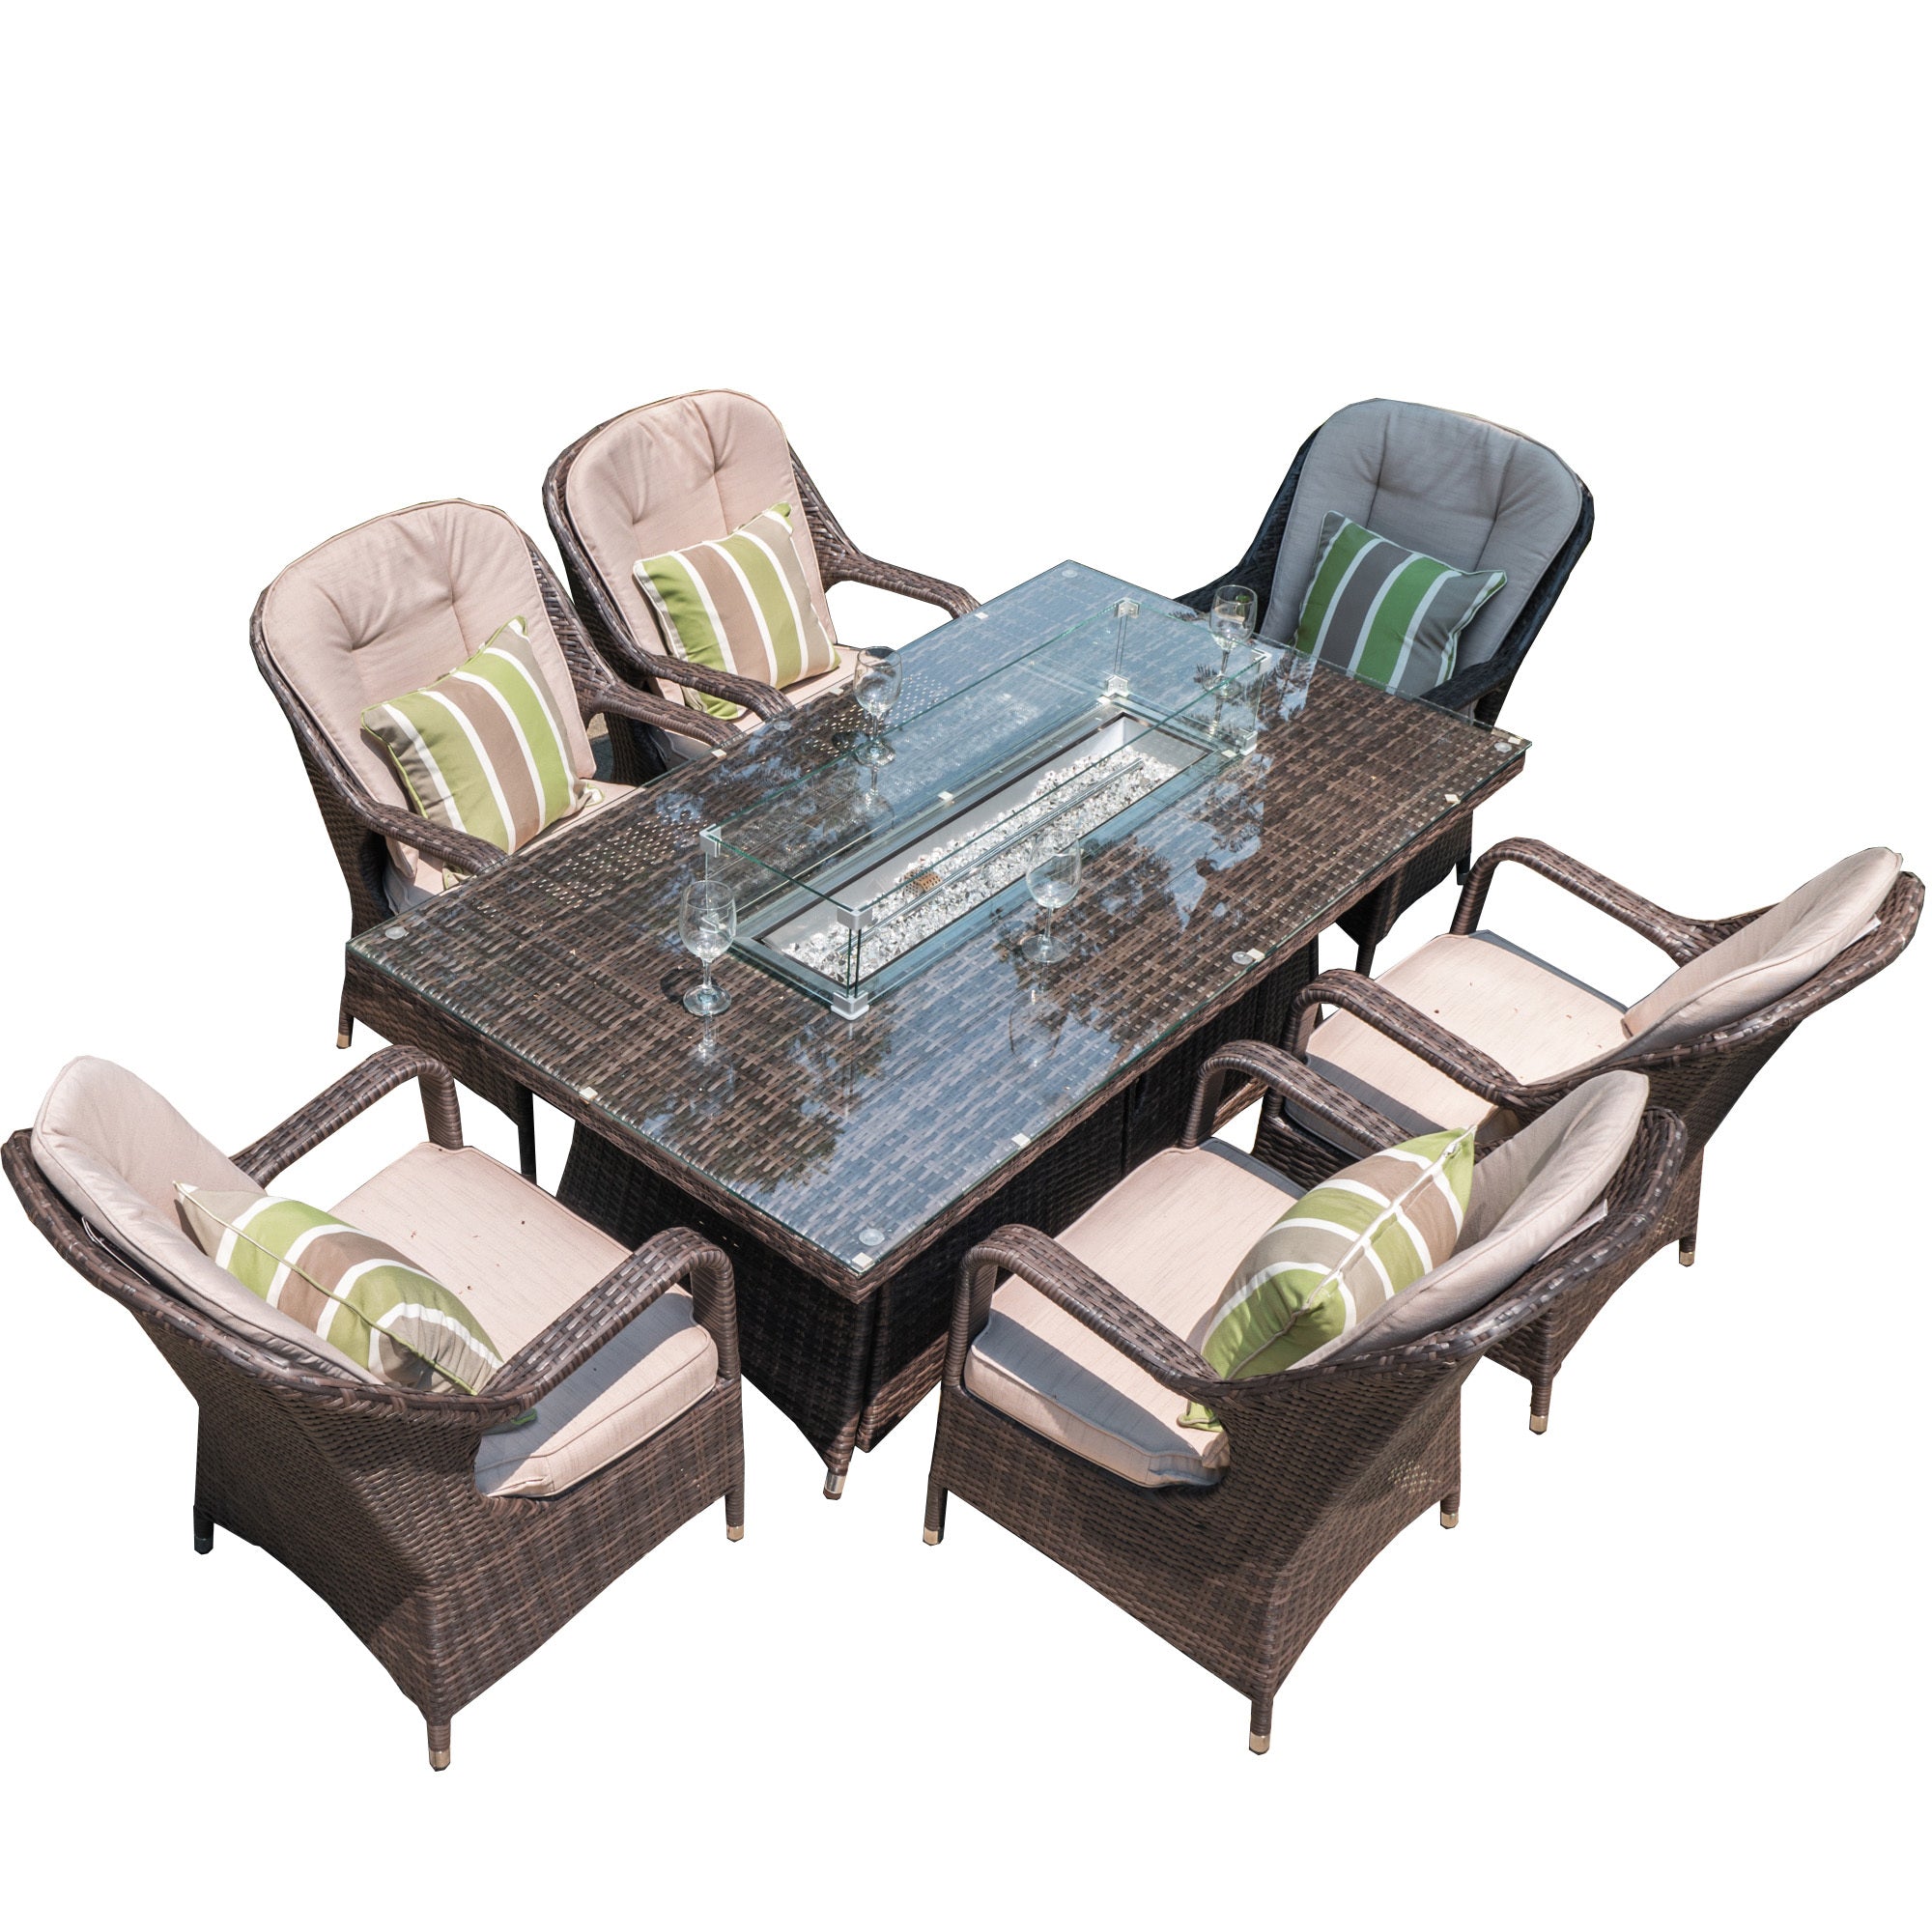 Garden Rattan Wicker Outdoor Furniture Patio 6 Seat Rectangular Fire Pit Dining Table With Eton Chair Sale - Abrihome